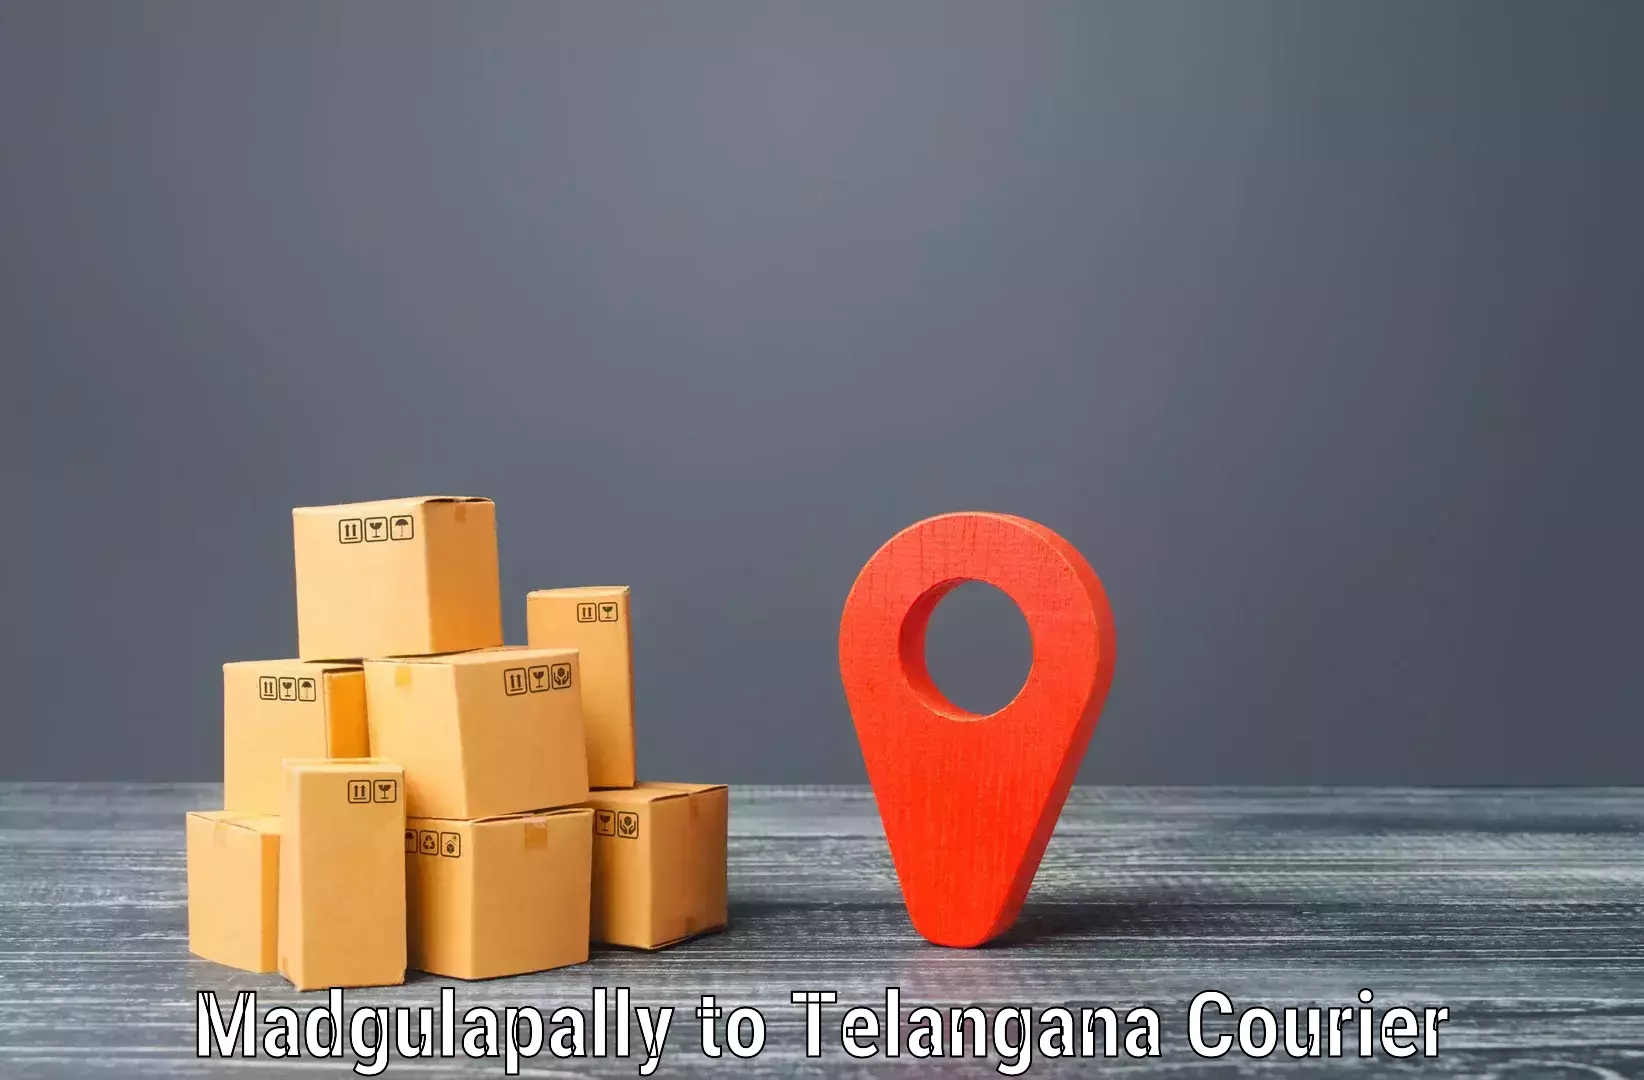 Reliable delivery network Madgulapally to Yerrupalem